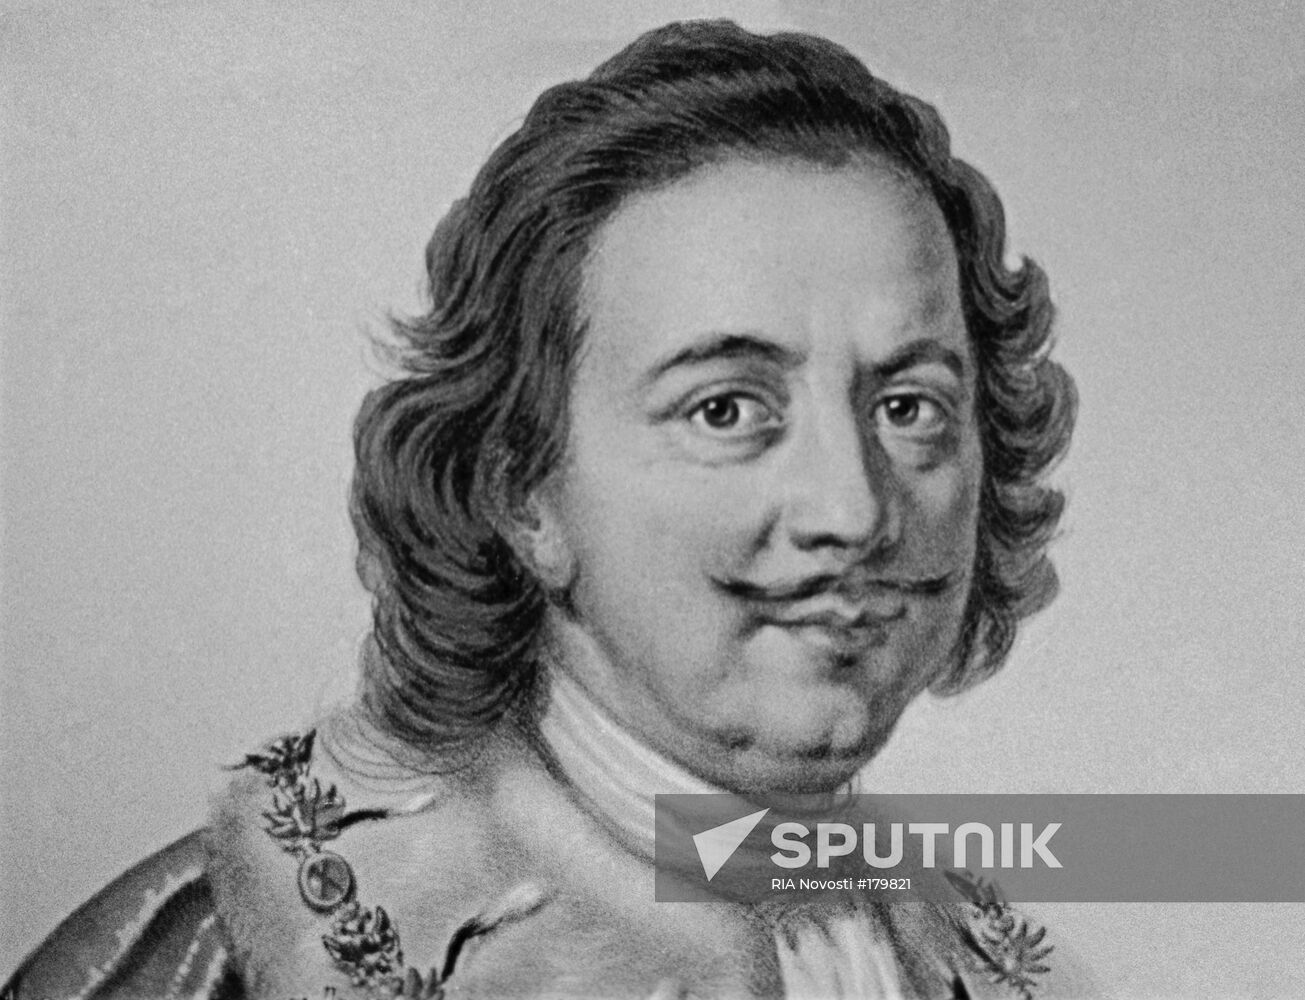 Peter the Great, tsar